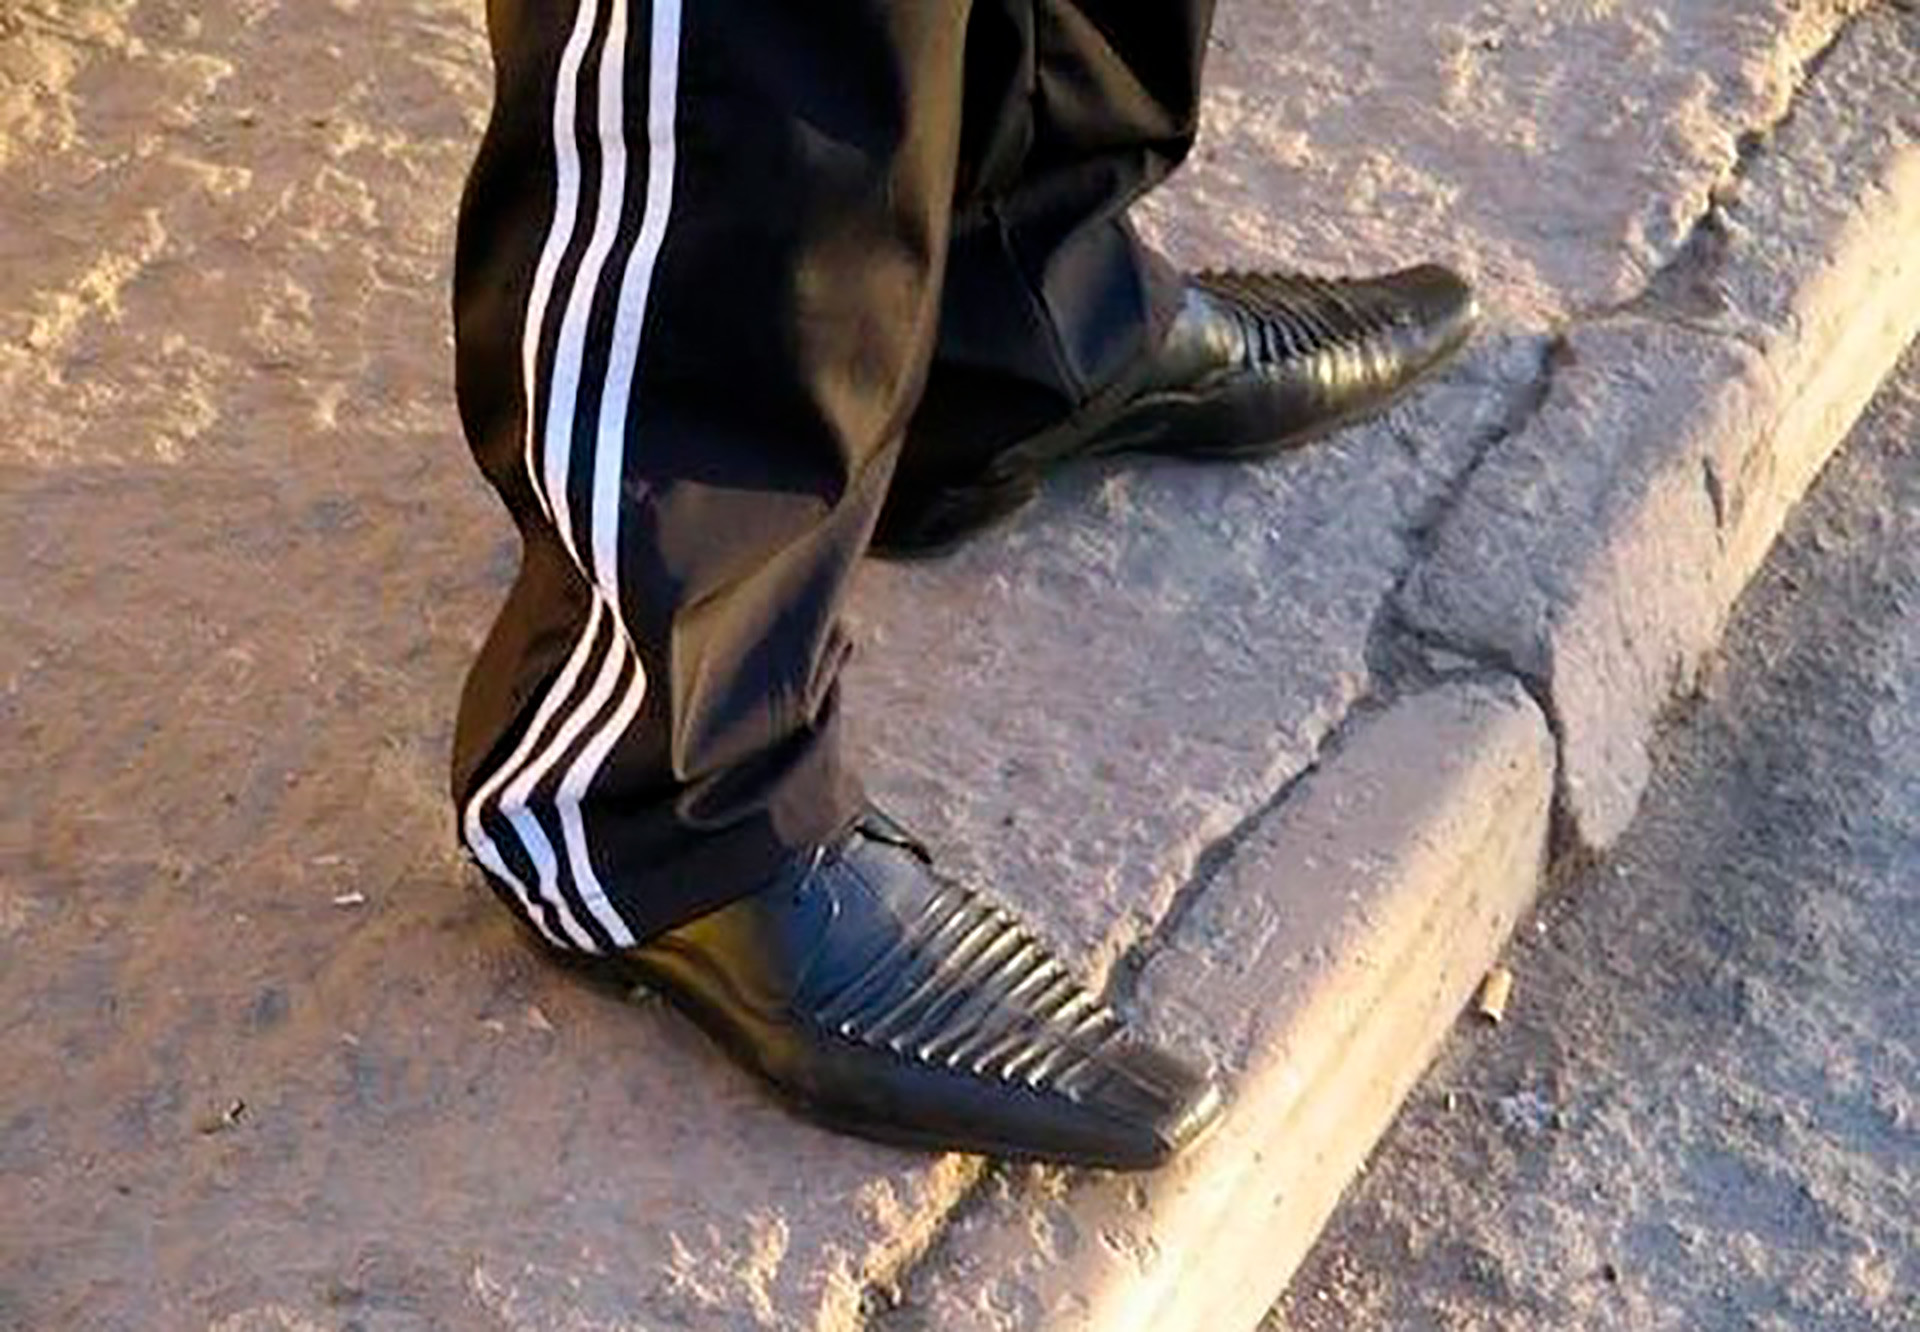 The combination of Adidas sweatpants and leather shoes is especially classy (especially if you're a gopnik and have no sense of style at all)